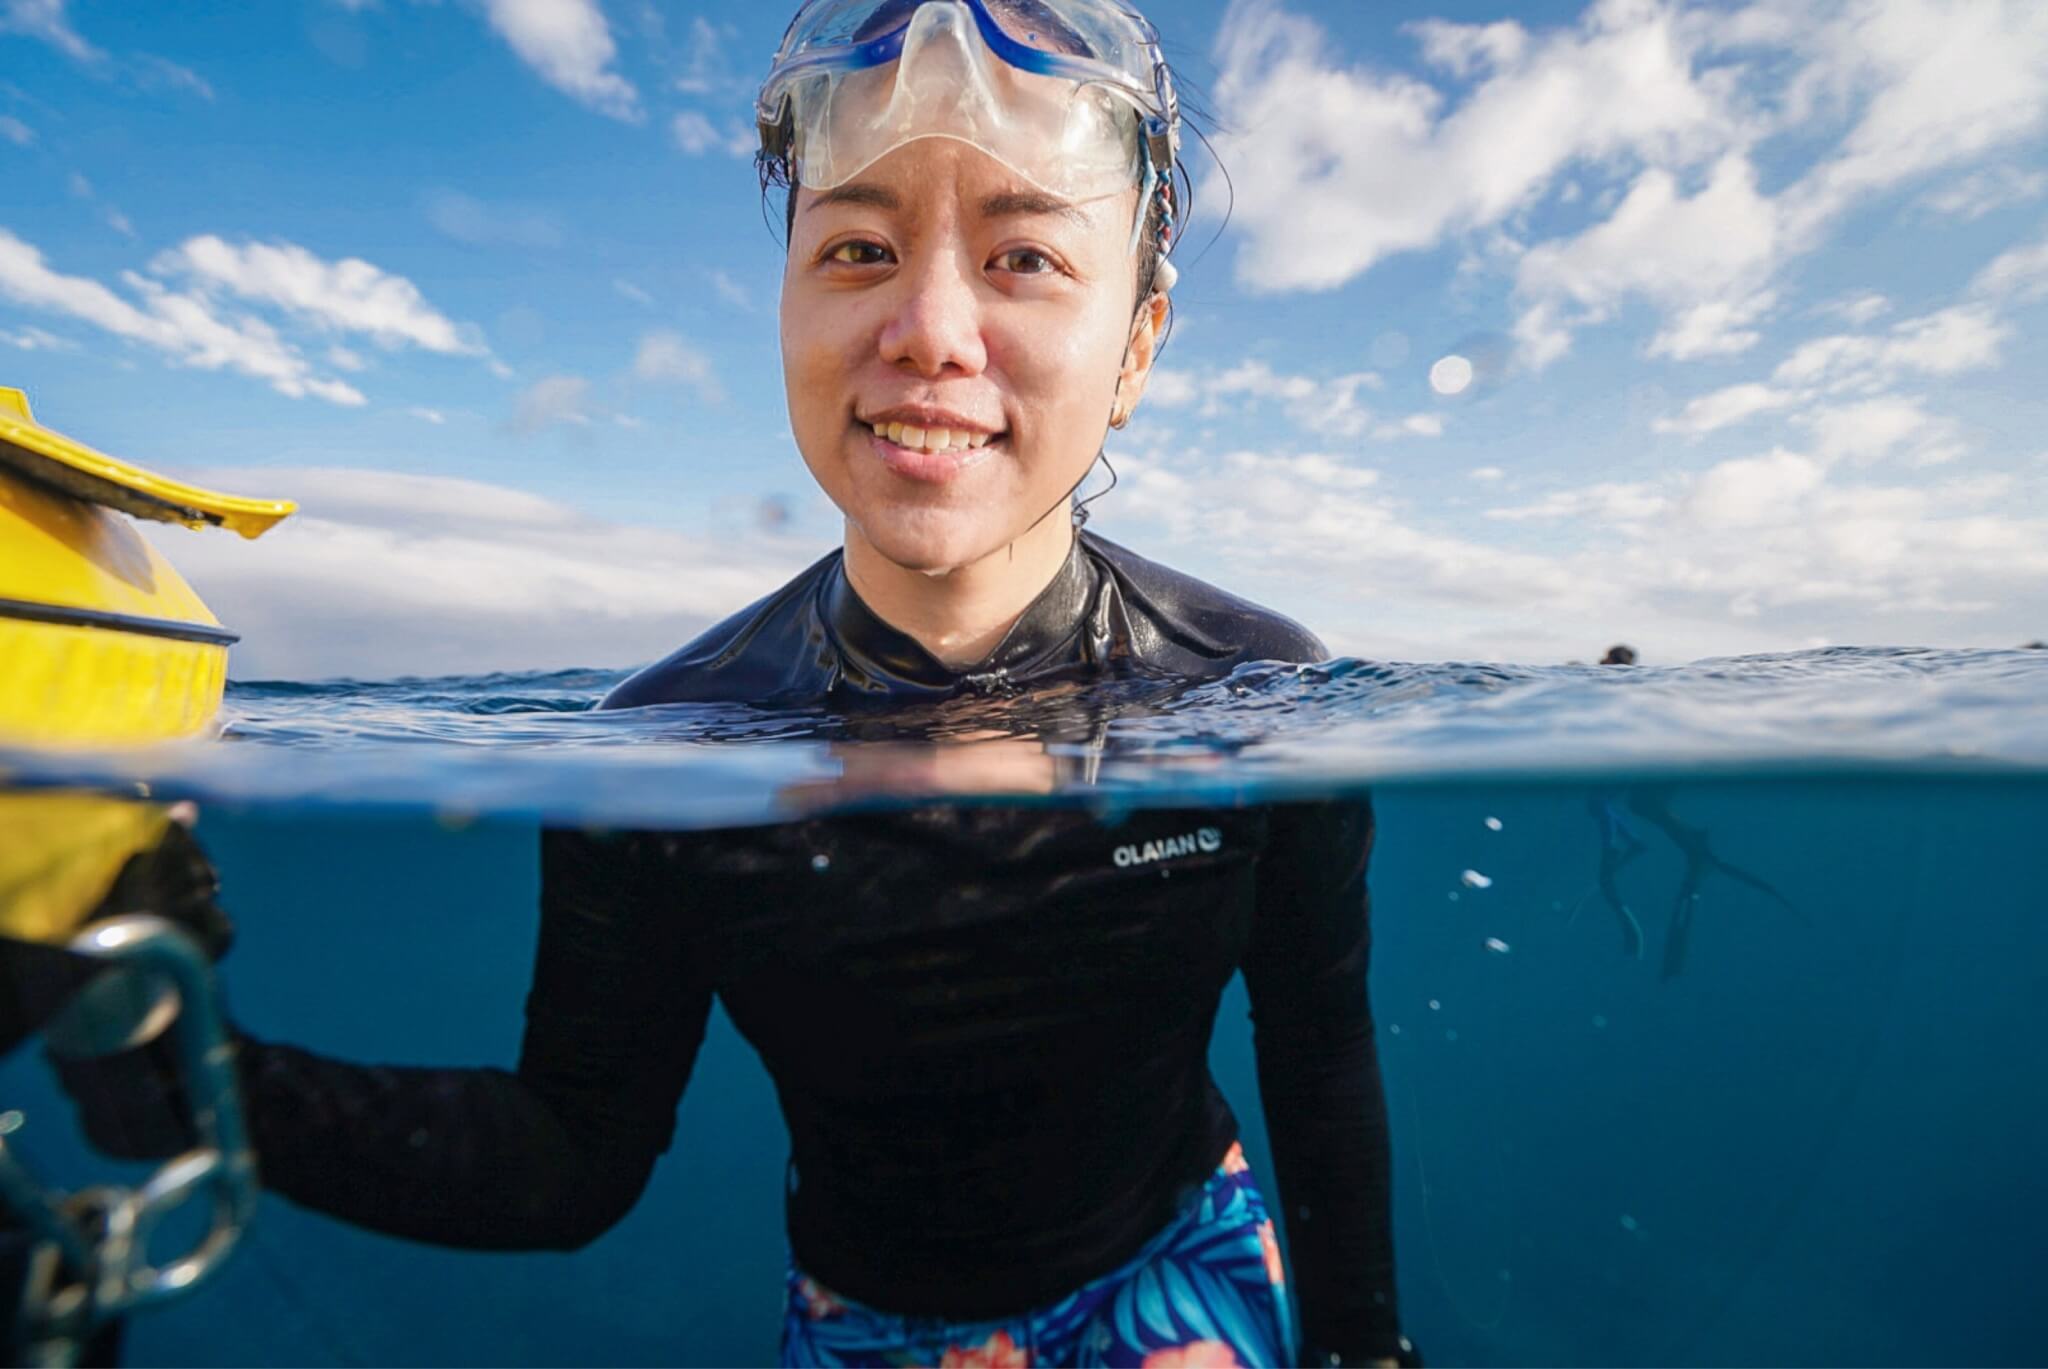 Image of June, a KLA employee, in the ocean with goggles and a wetsuit.